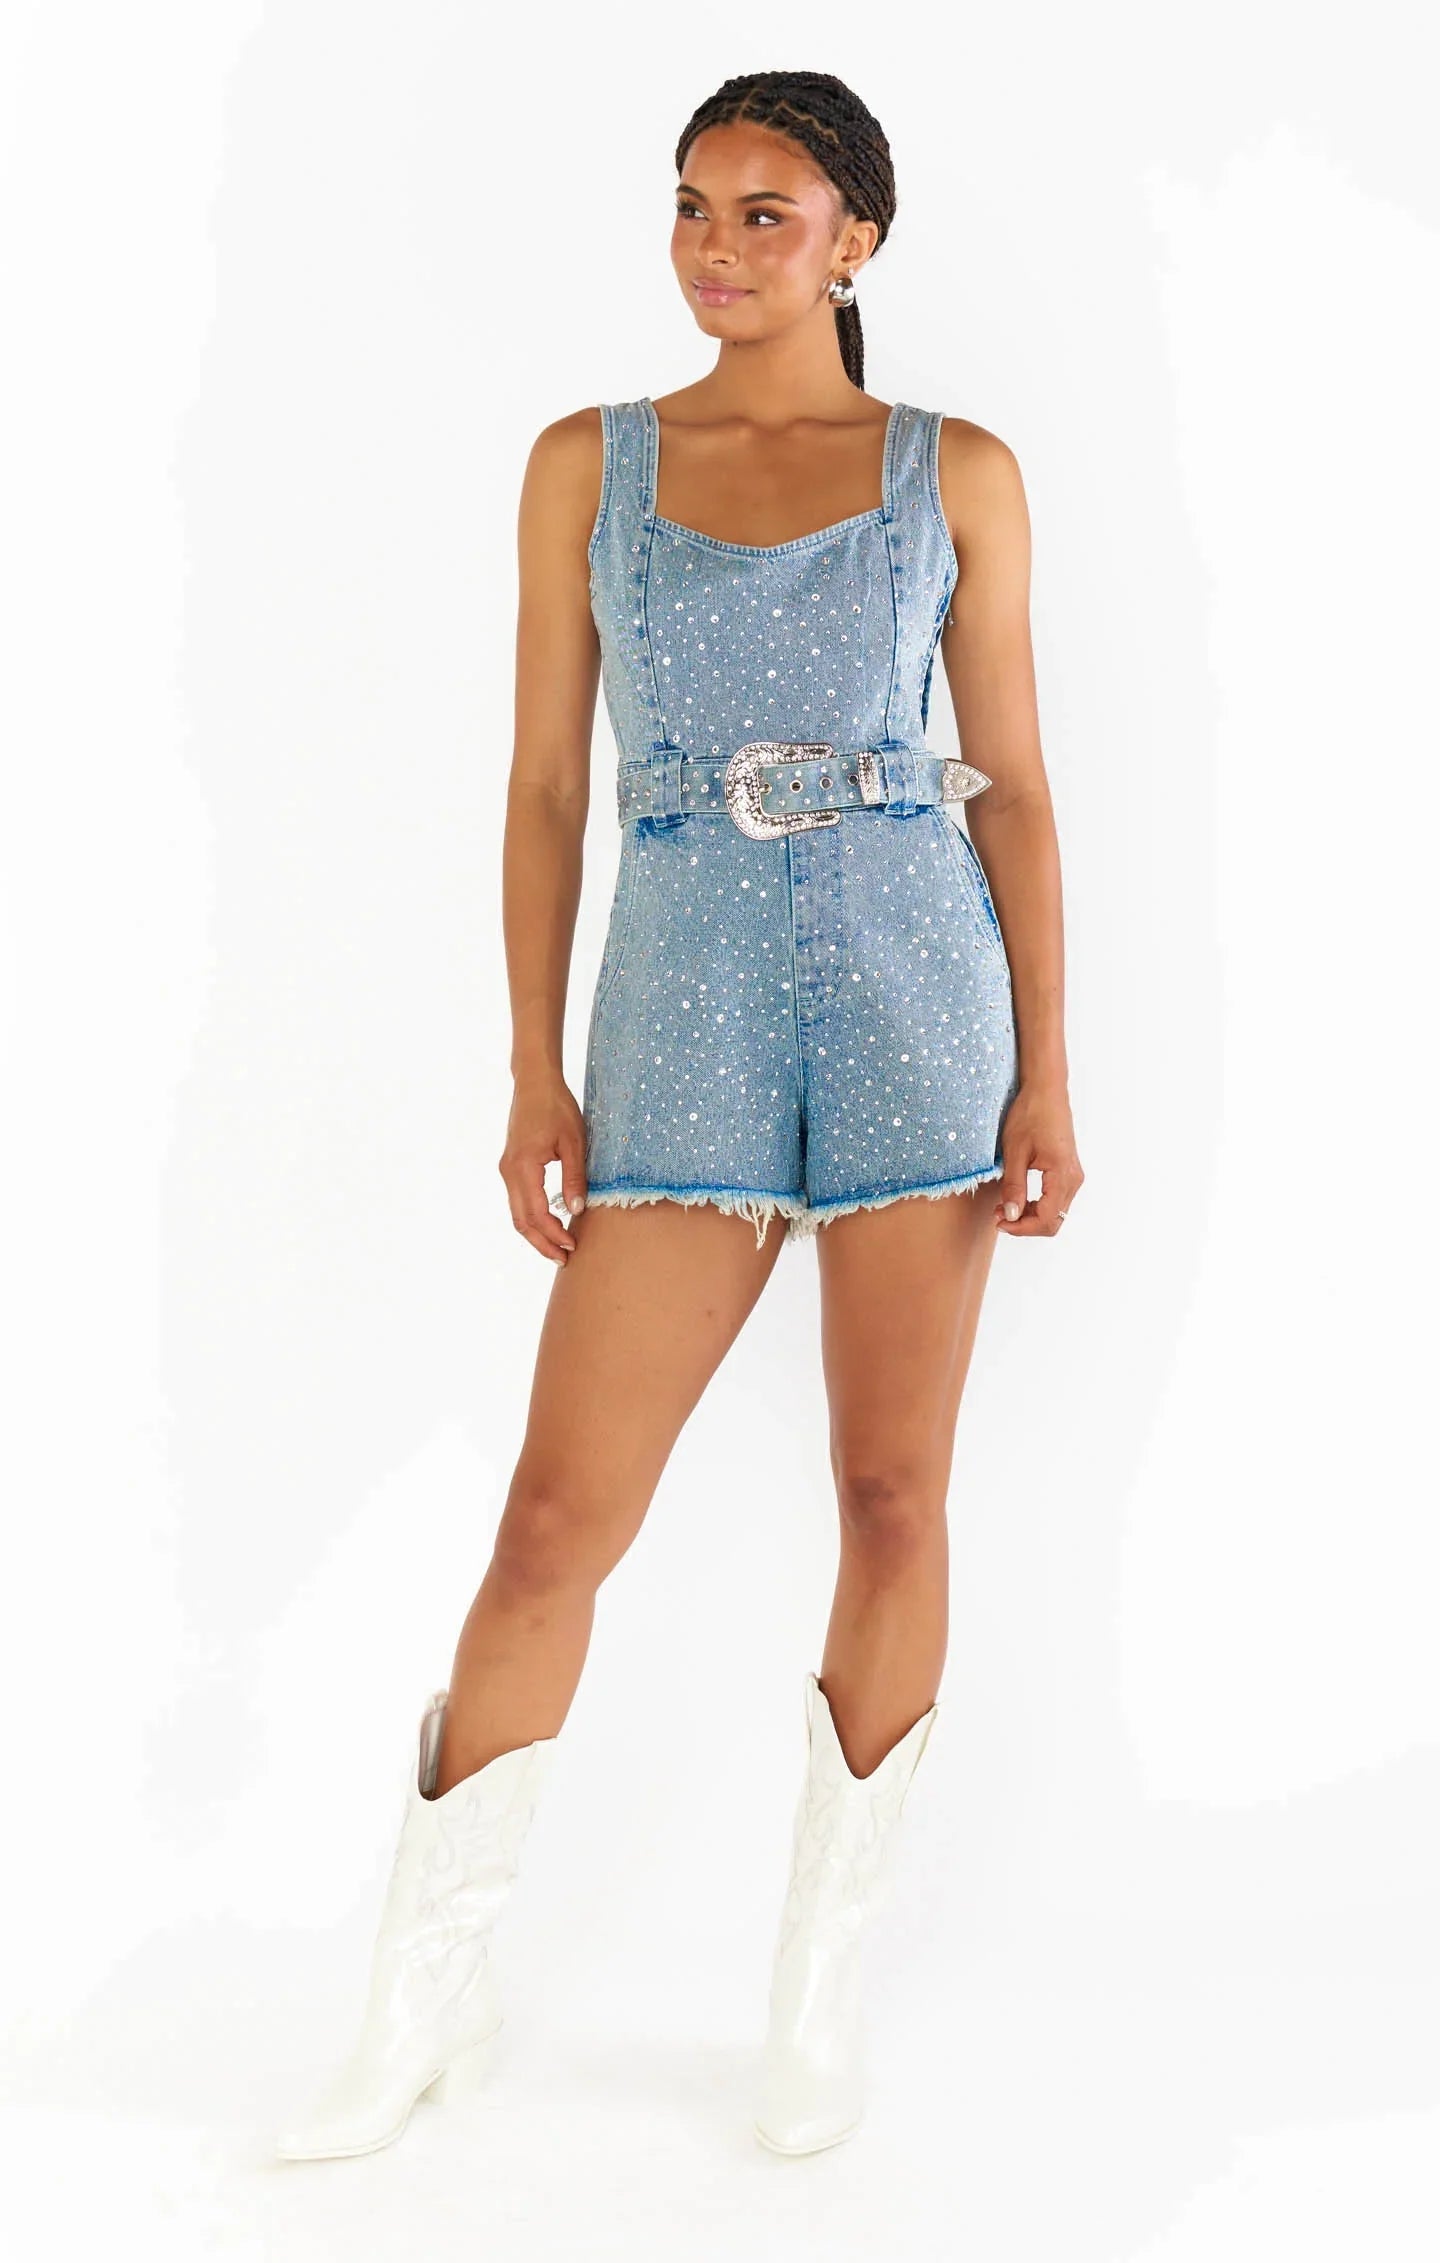 Shop Show Me Your Mumu Spears Crystal Embellished Romper - Premium Romper from Show Me Your Mumu Online now at Spoiled Brat 